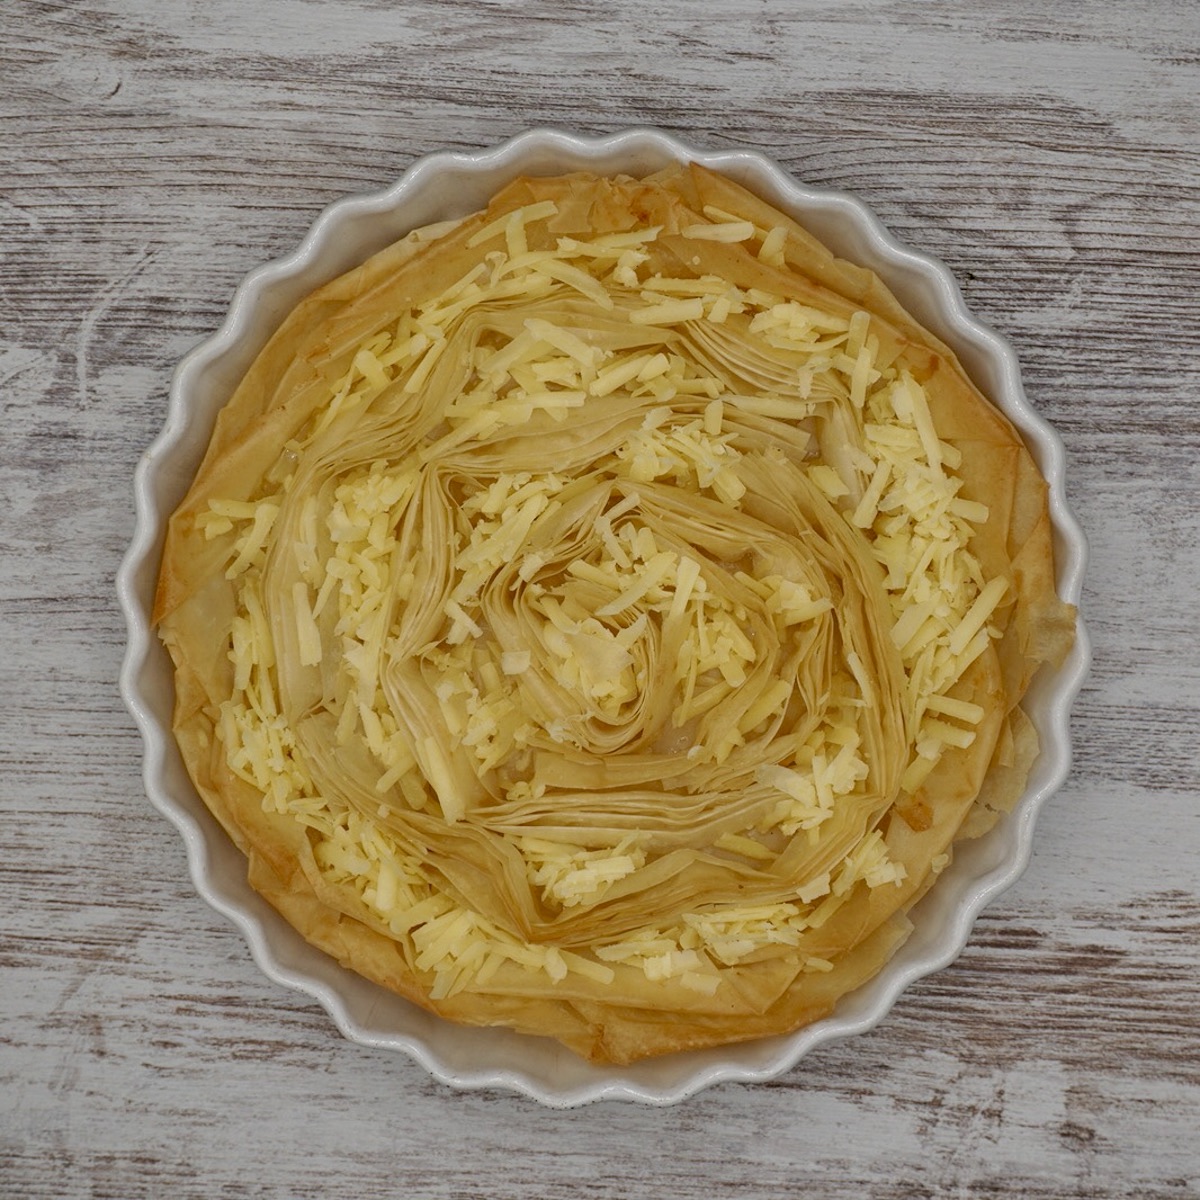 A filo tart case with grated cheese.